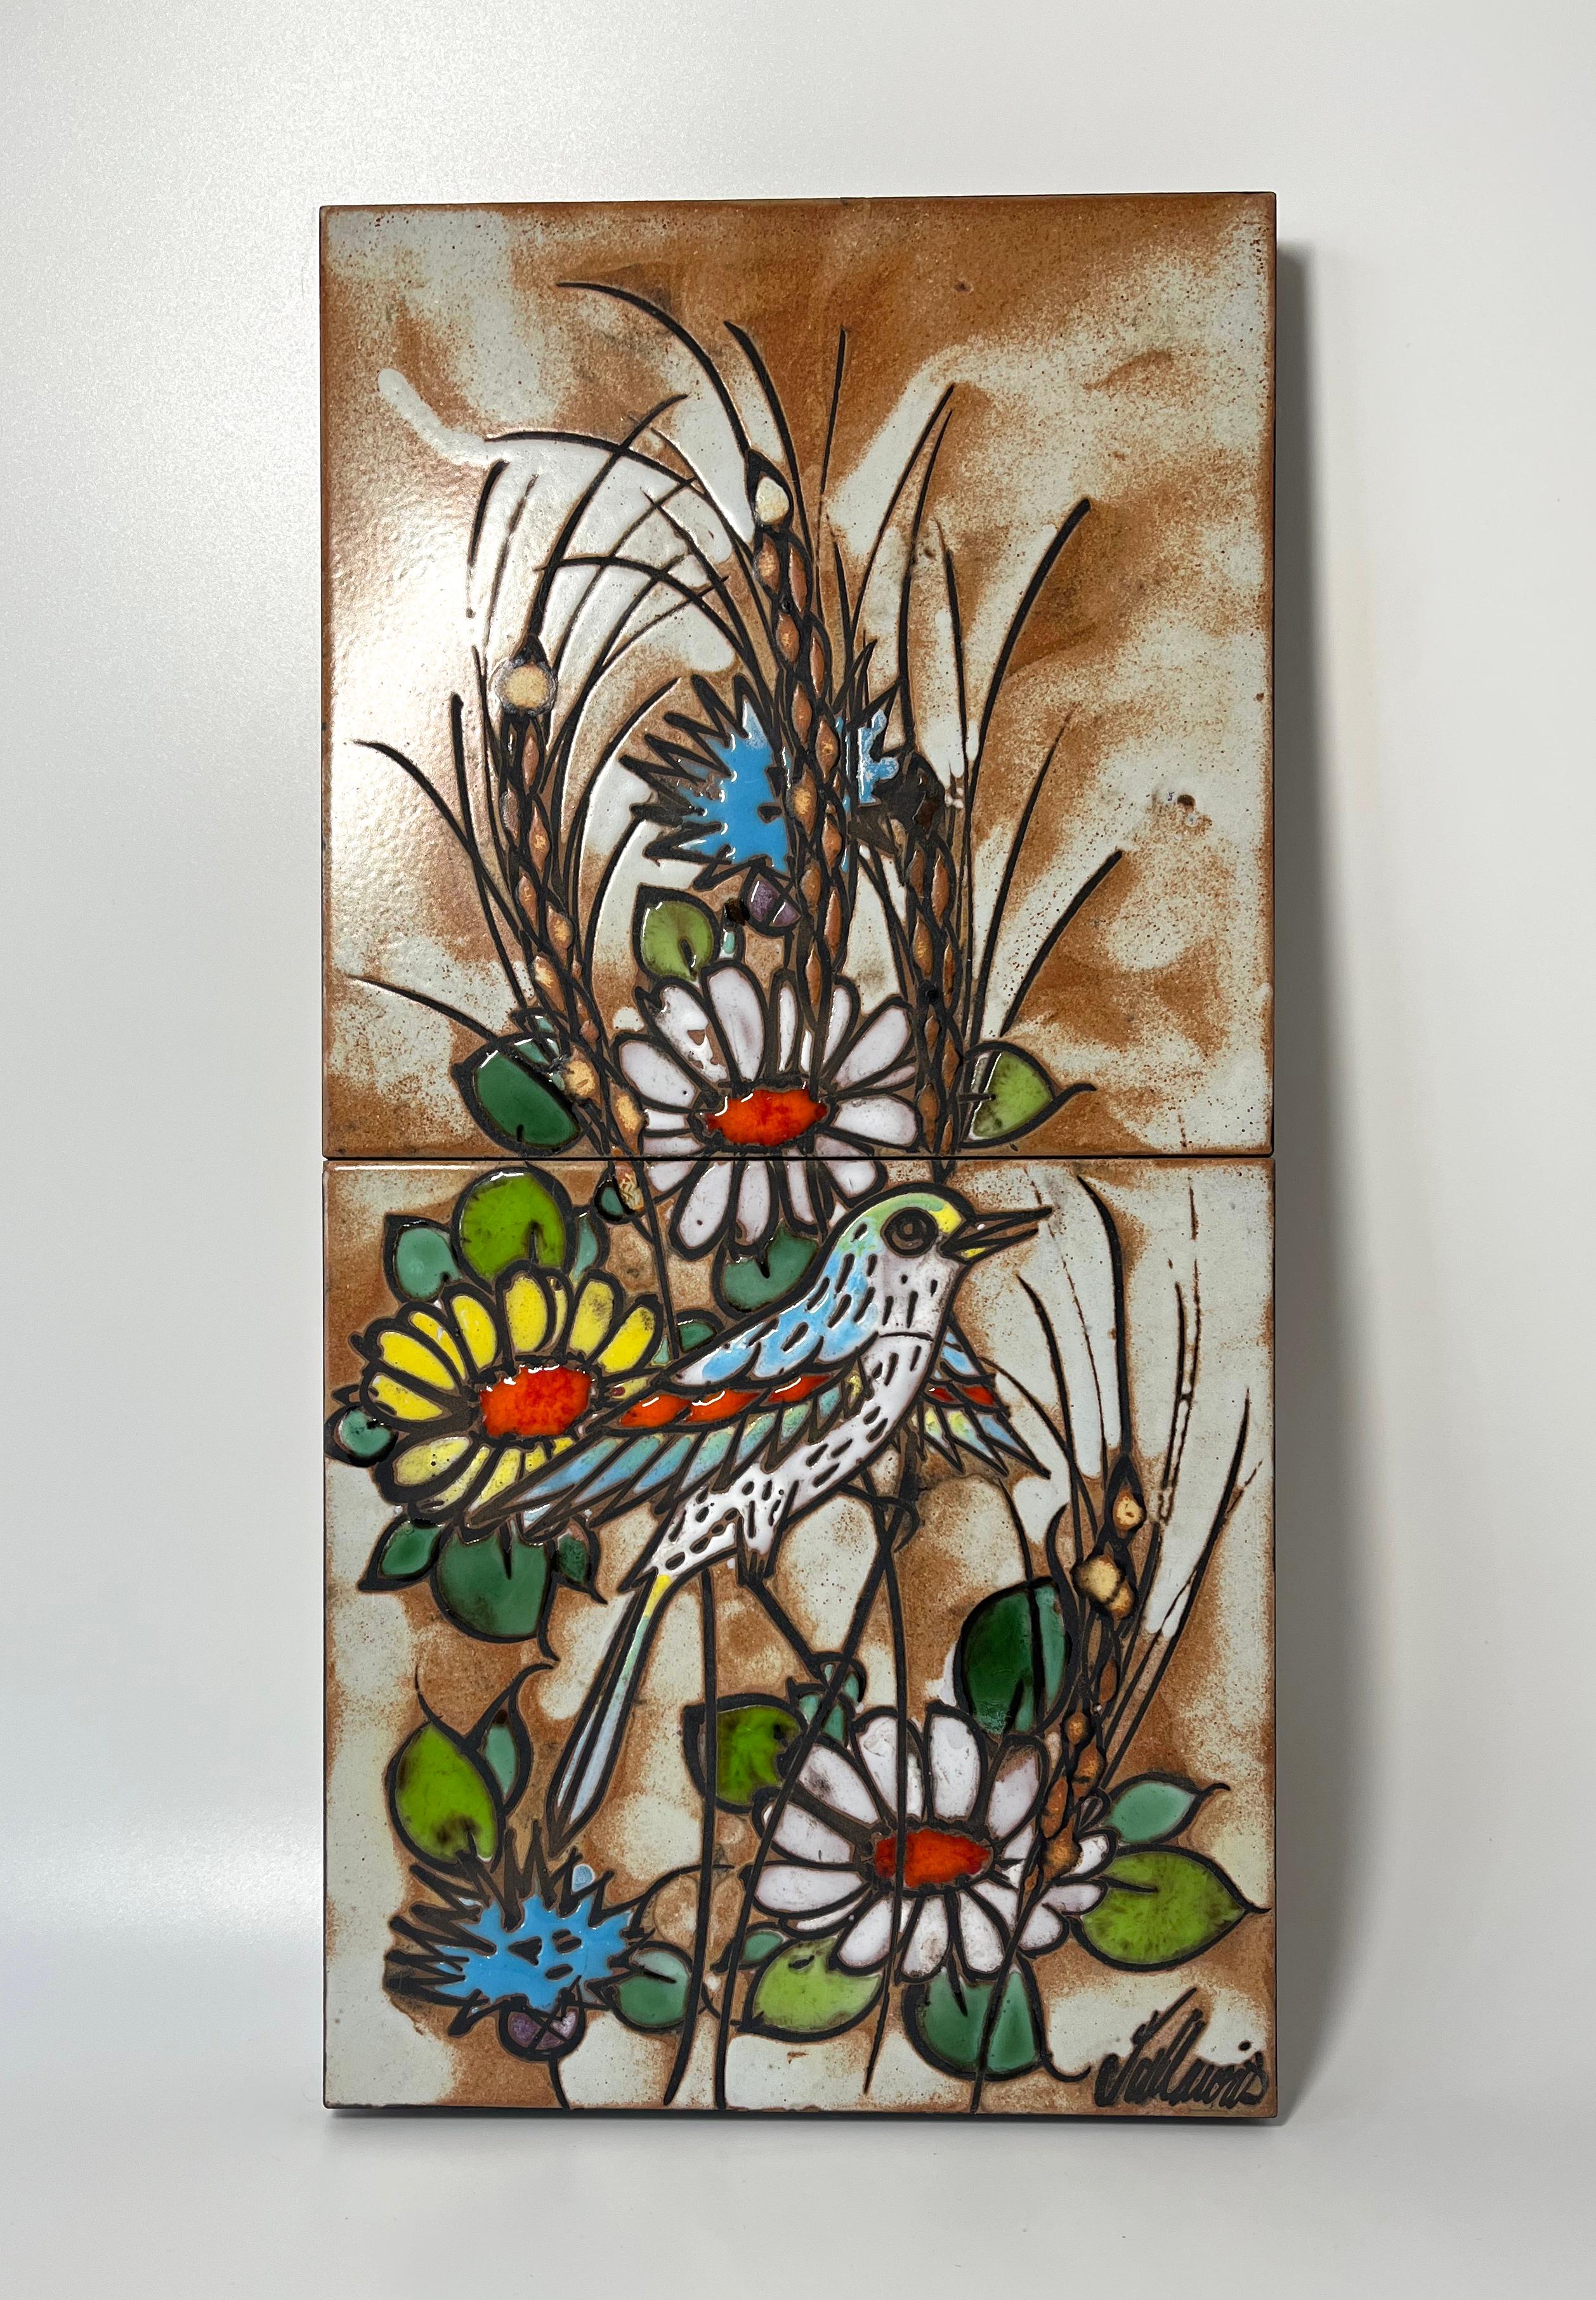 Songbird and Daisies enamel and glazed ceramic tiles wall decoration, Vallauris, France c1960's
Vibrantly coloured enamel and glaze. 
Signed Vallauris
Height 16 inch, Width 8 inch
Each tile is 8 inch square
Mounted on MDF board with wall